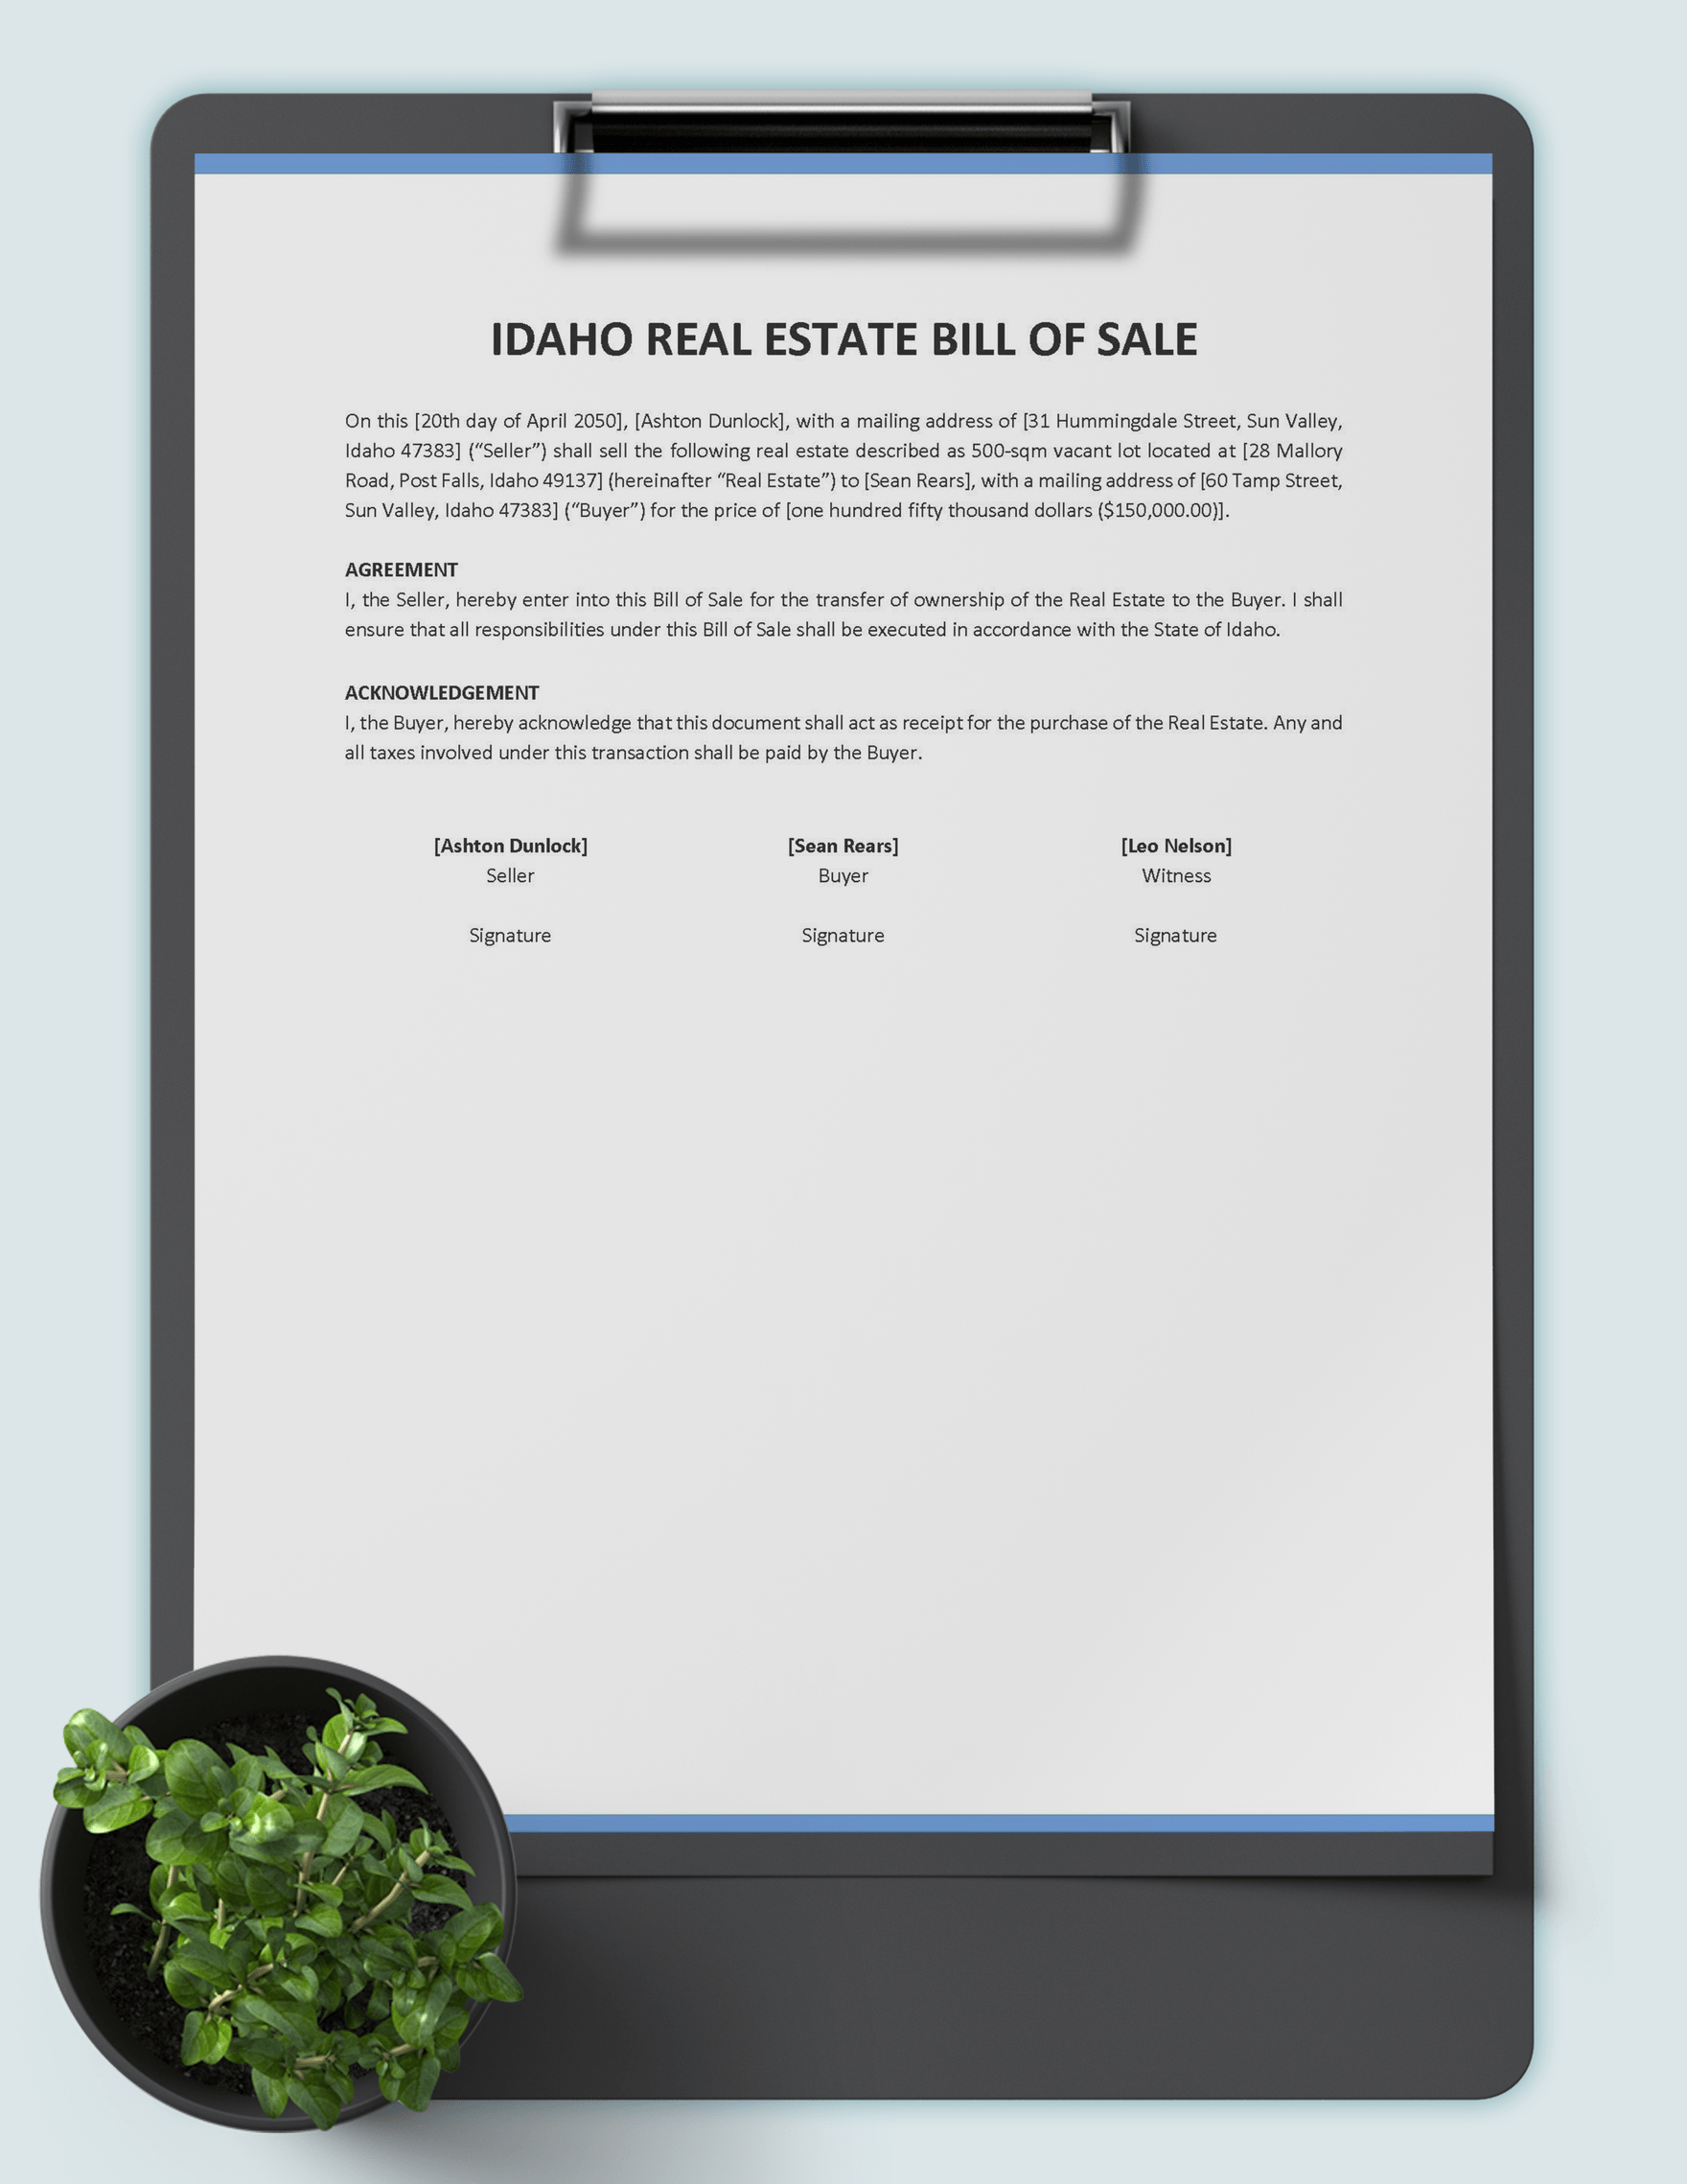 Idaho Real Estate Bill of Sale Template